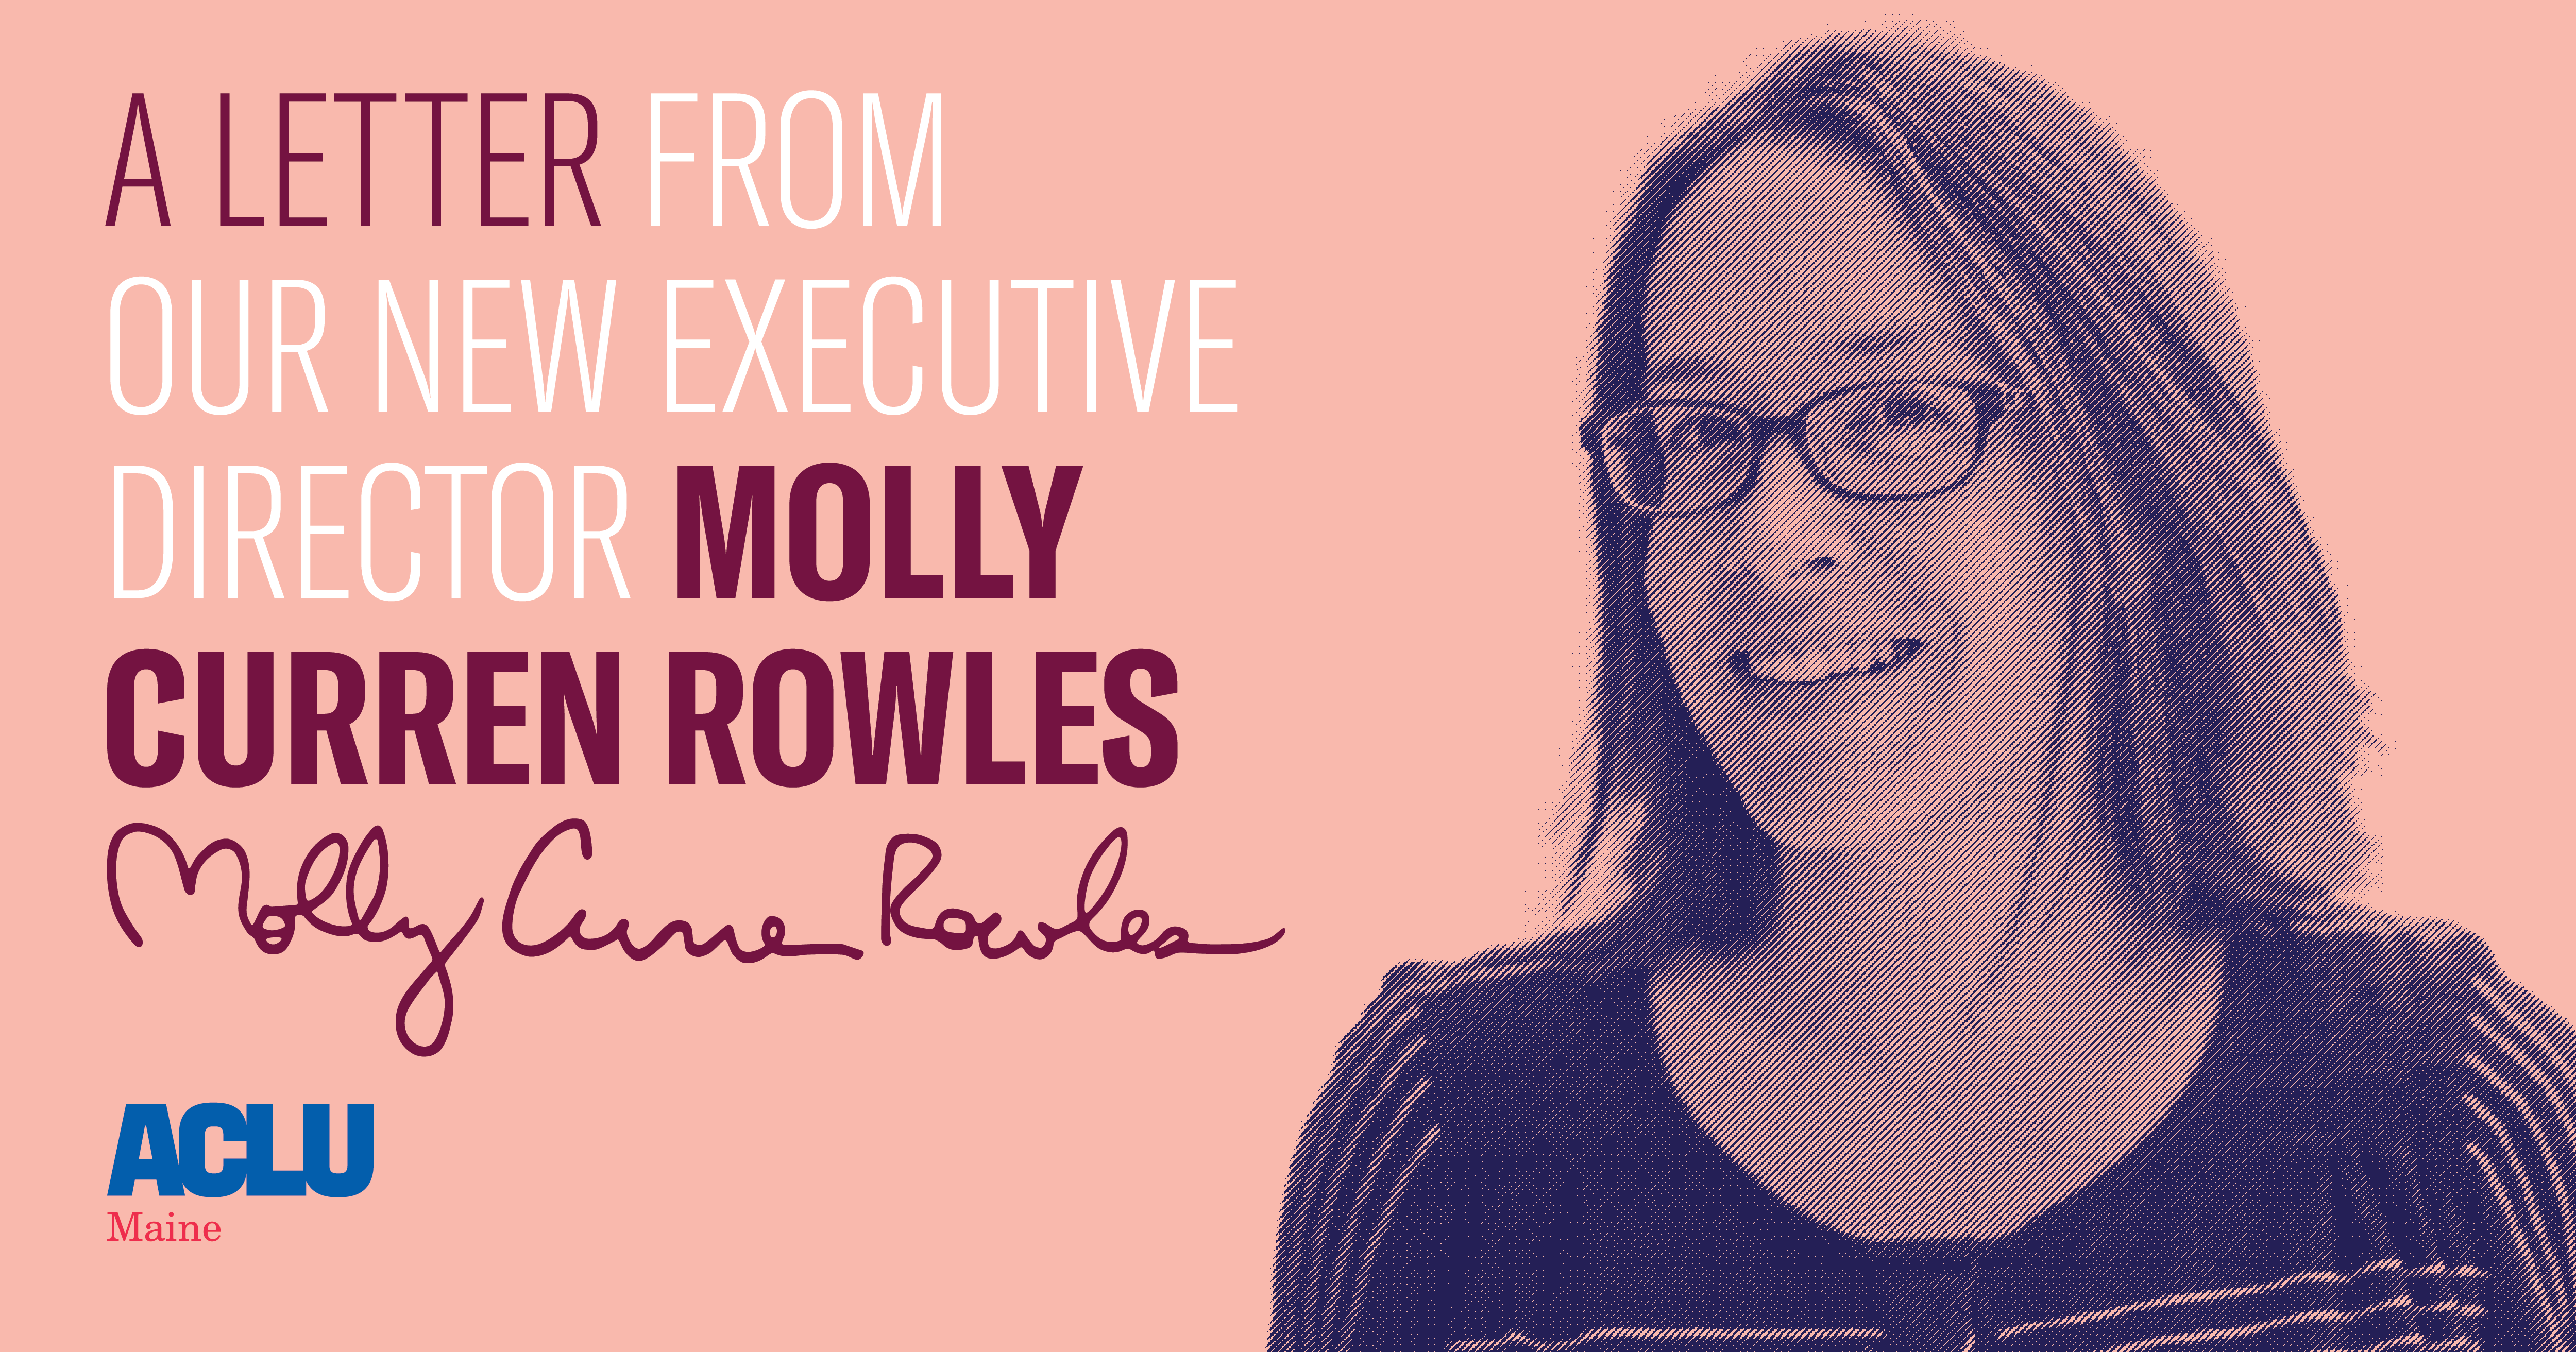 A Letter from Our New Executive Director Molly Curren Rowles